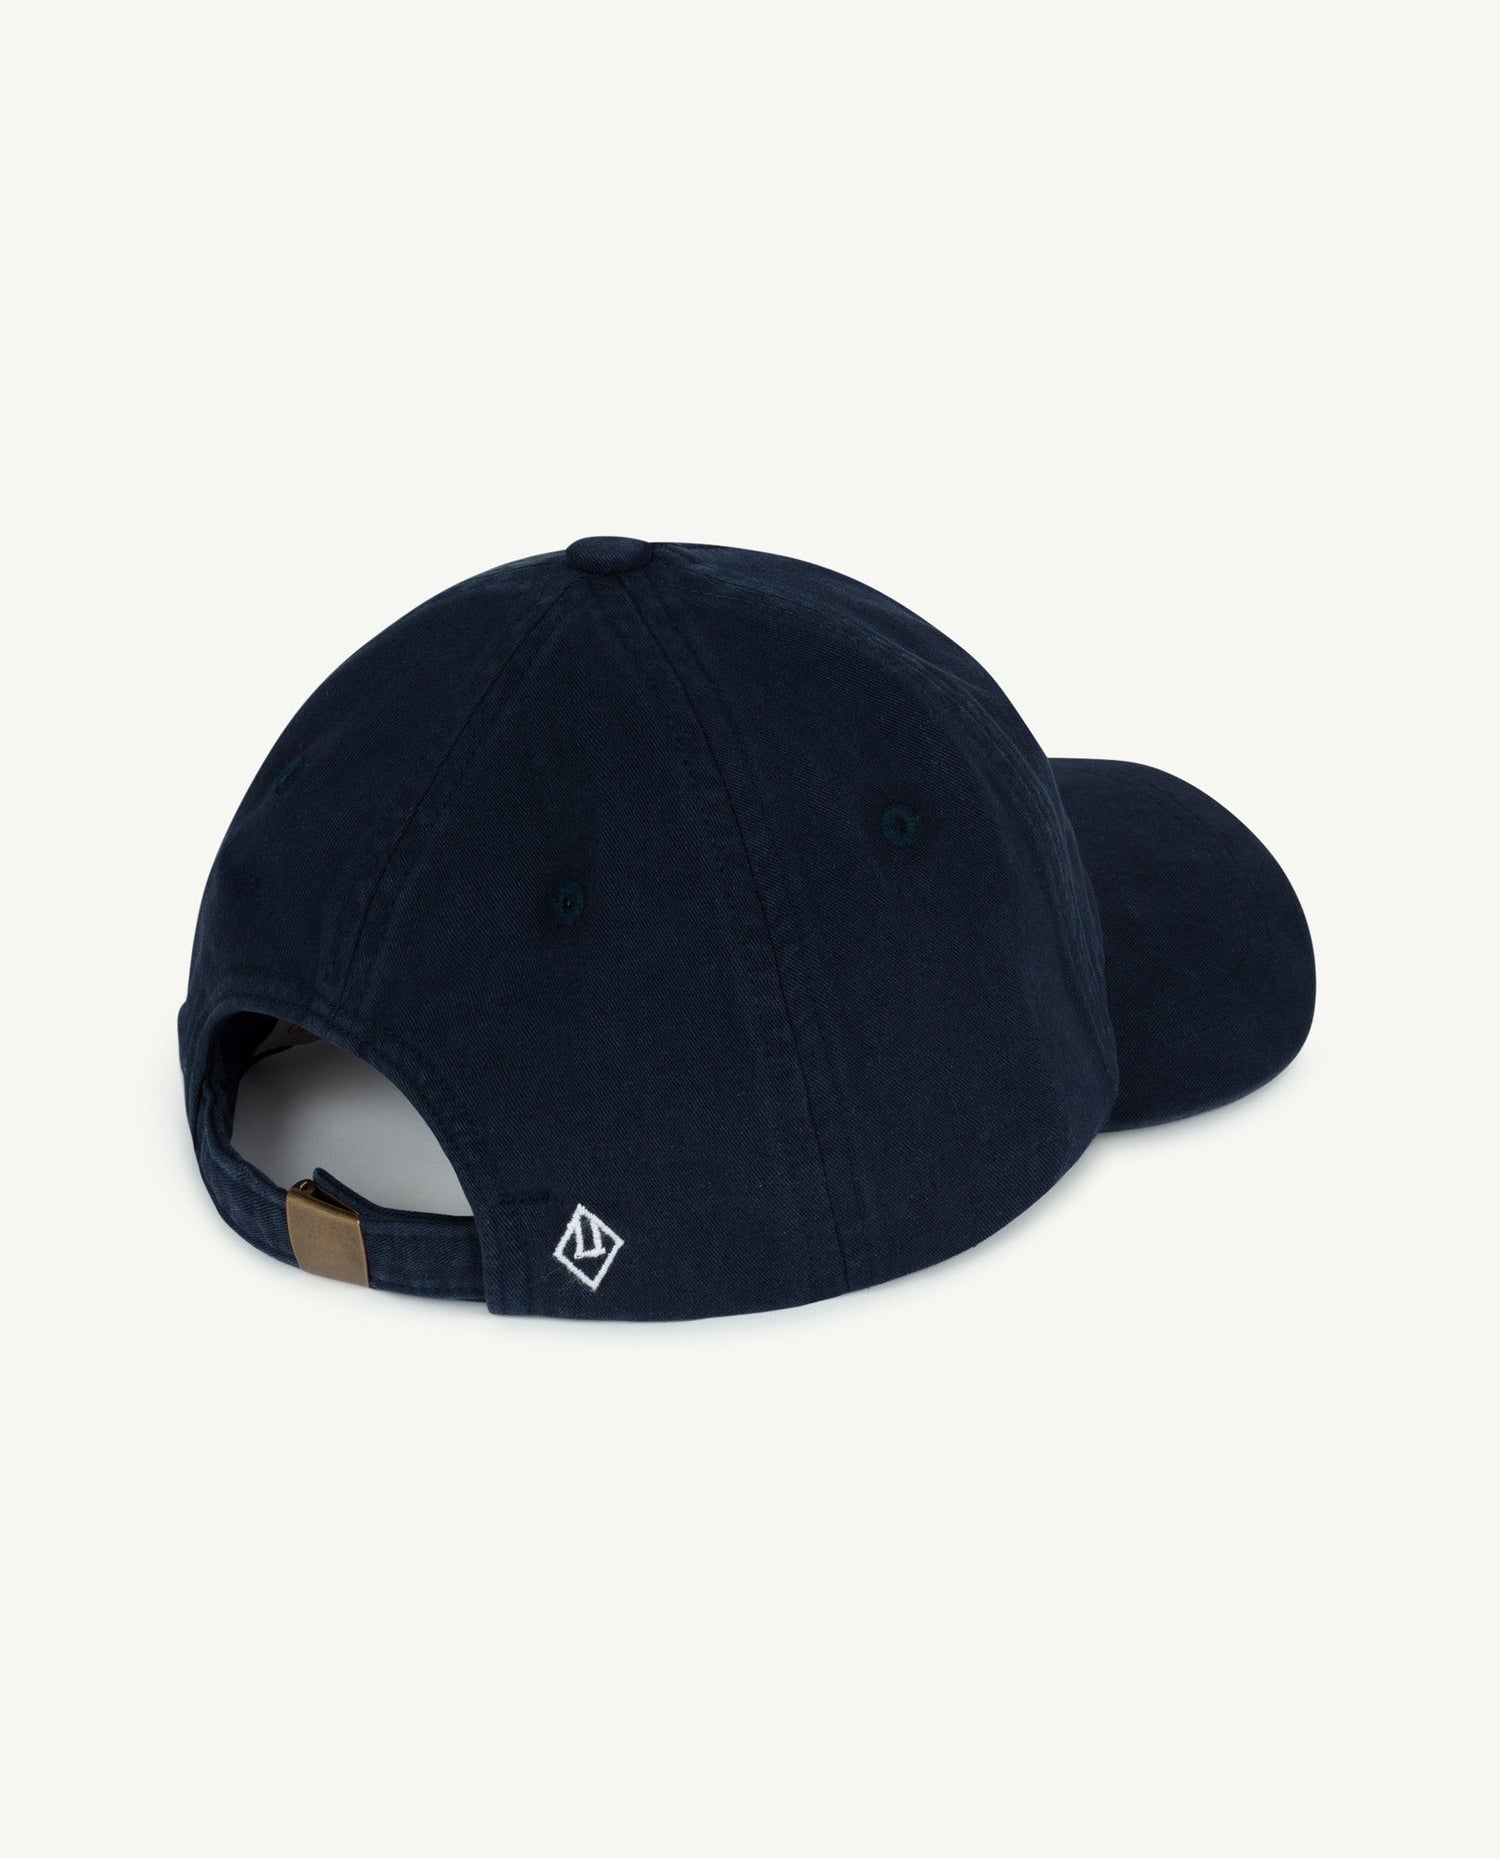 Hamster kids cap Navy Accessories The Animals Observatory 